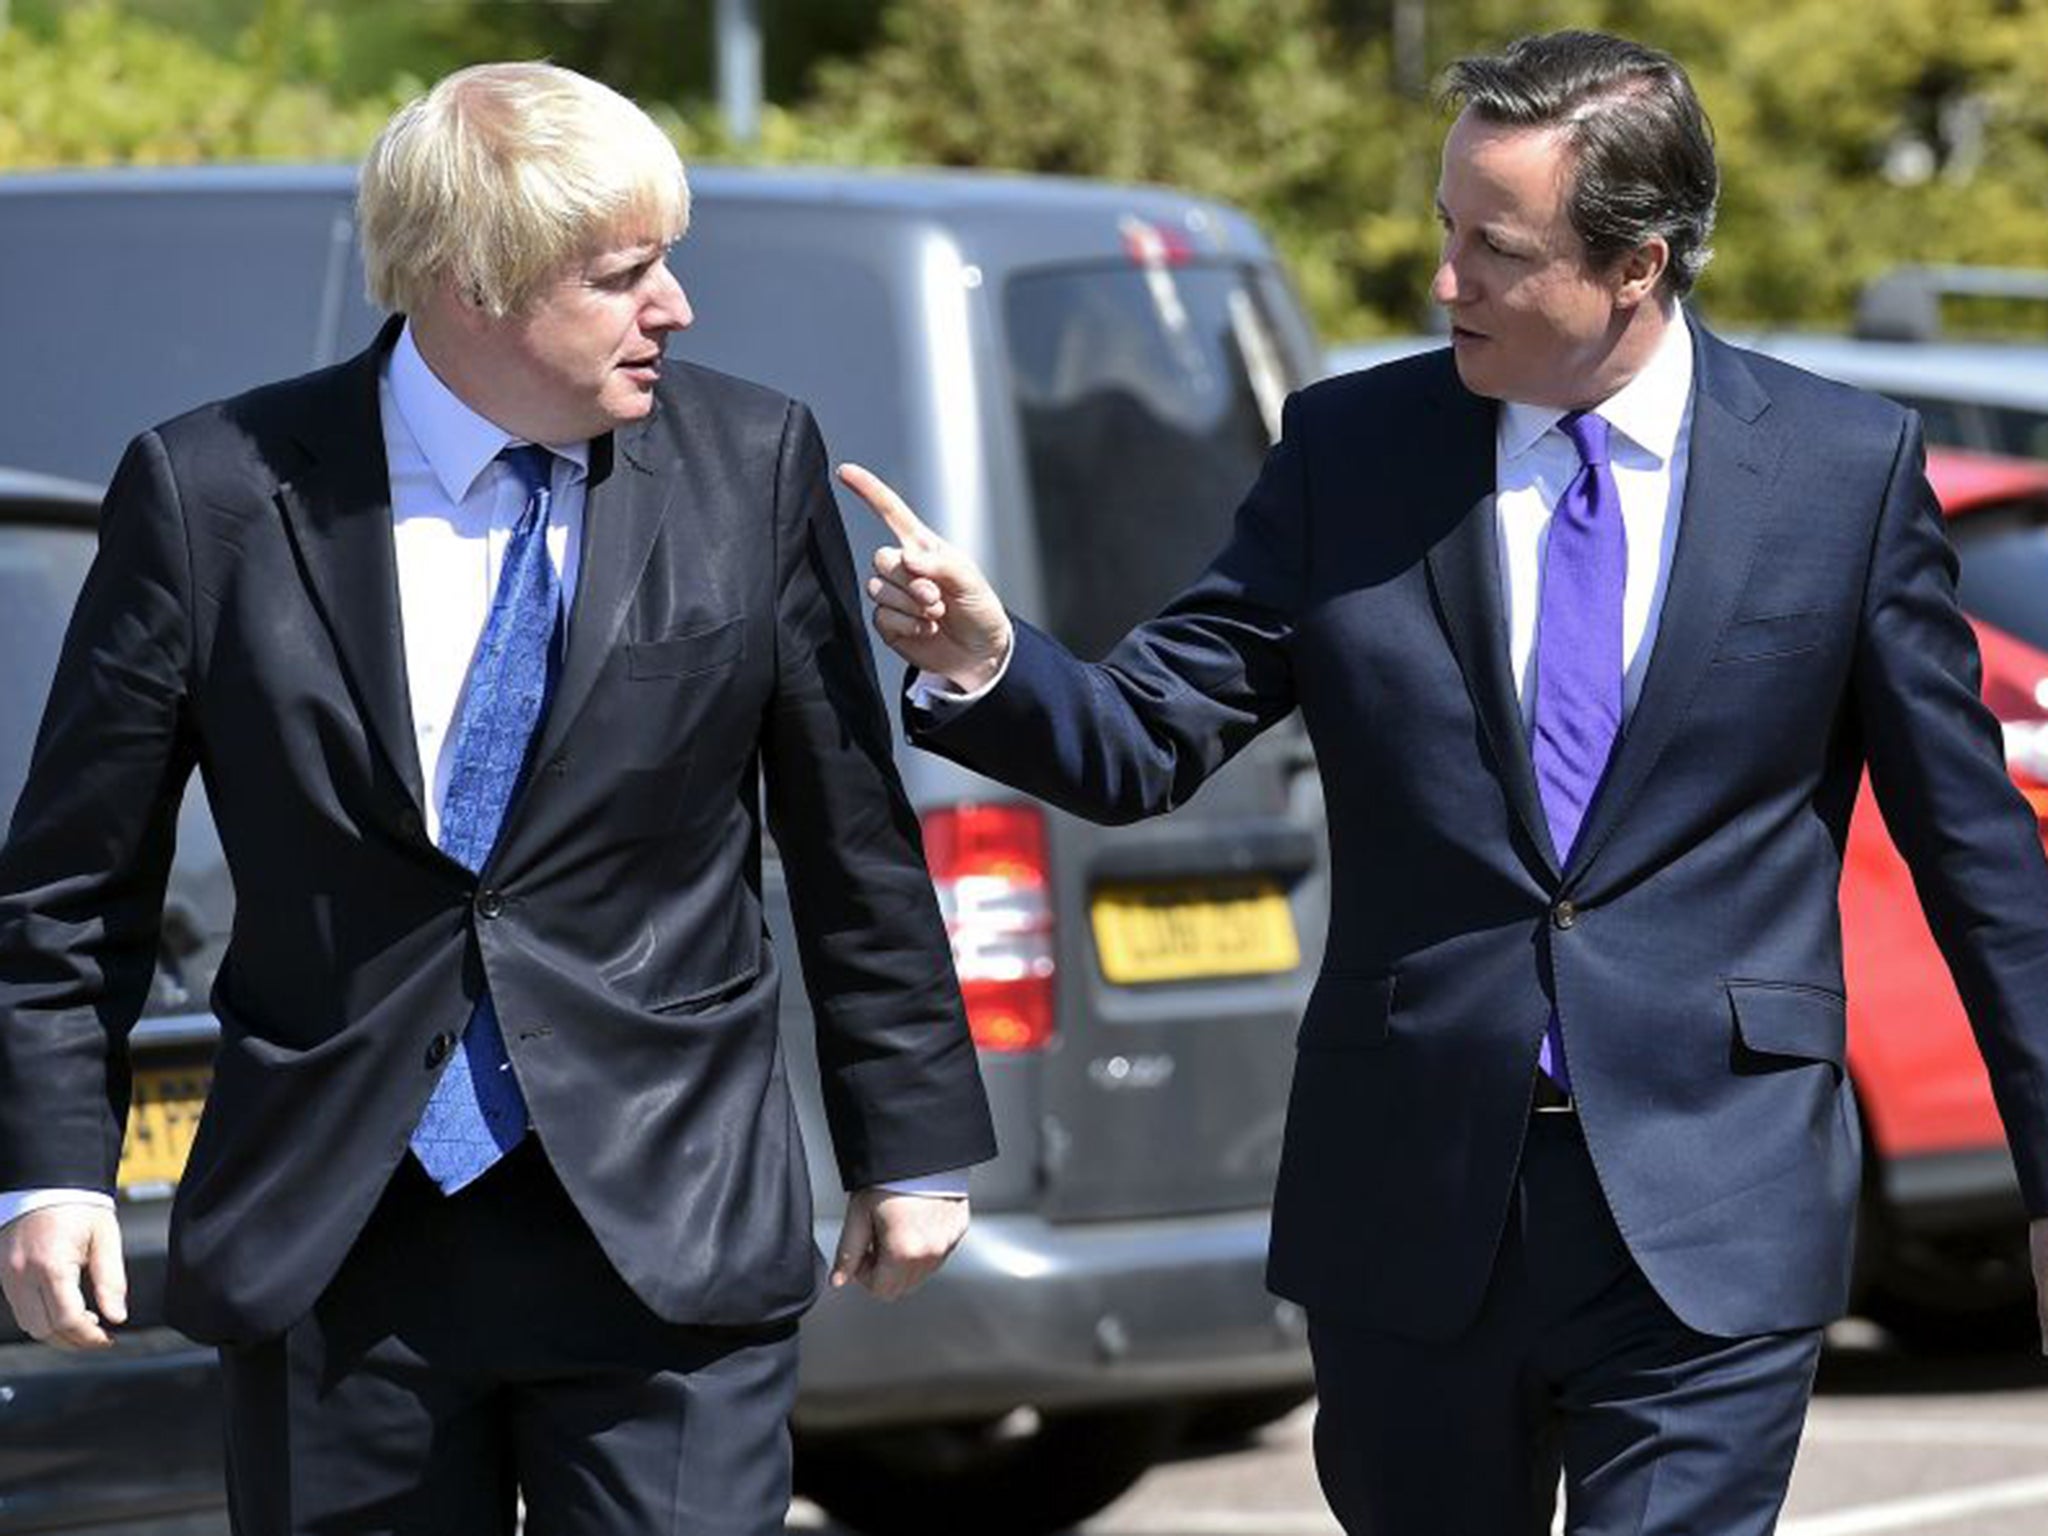 The Prime Minister has rejected Boris Johnson's proposal for a second EU referendum